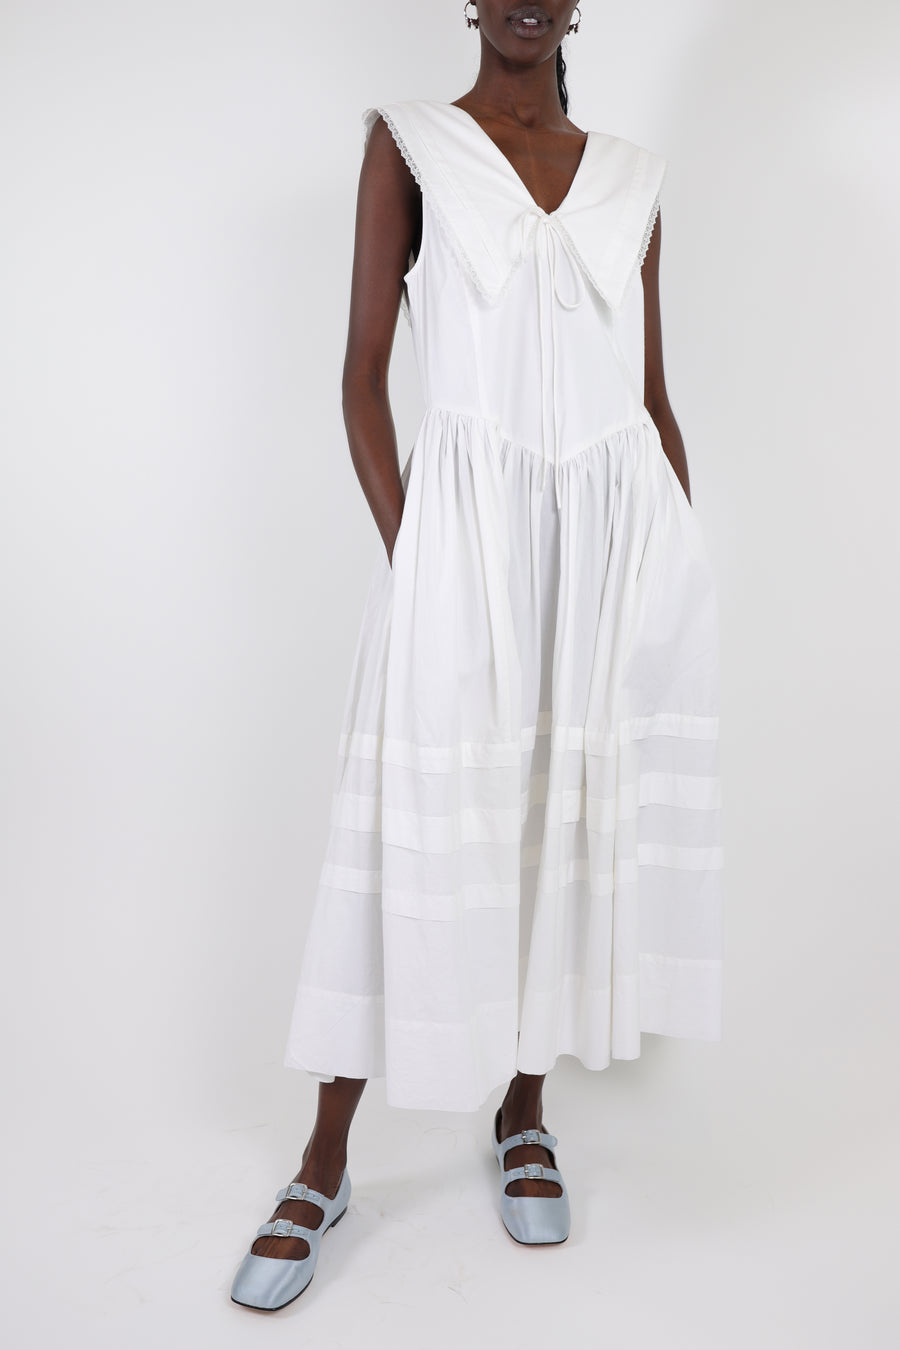 Sleeveless cotton midi dress in white with oversized collar on model